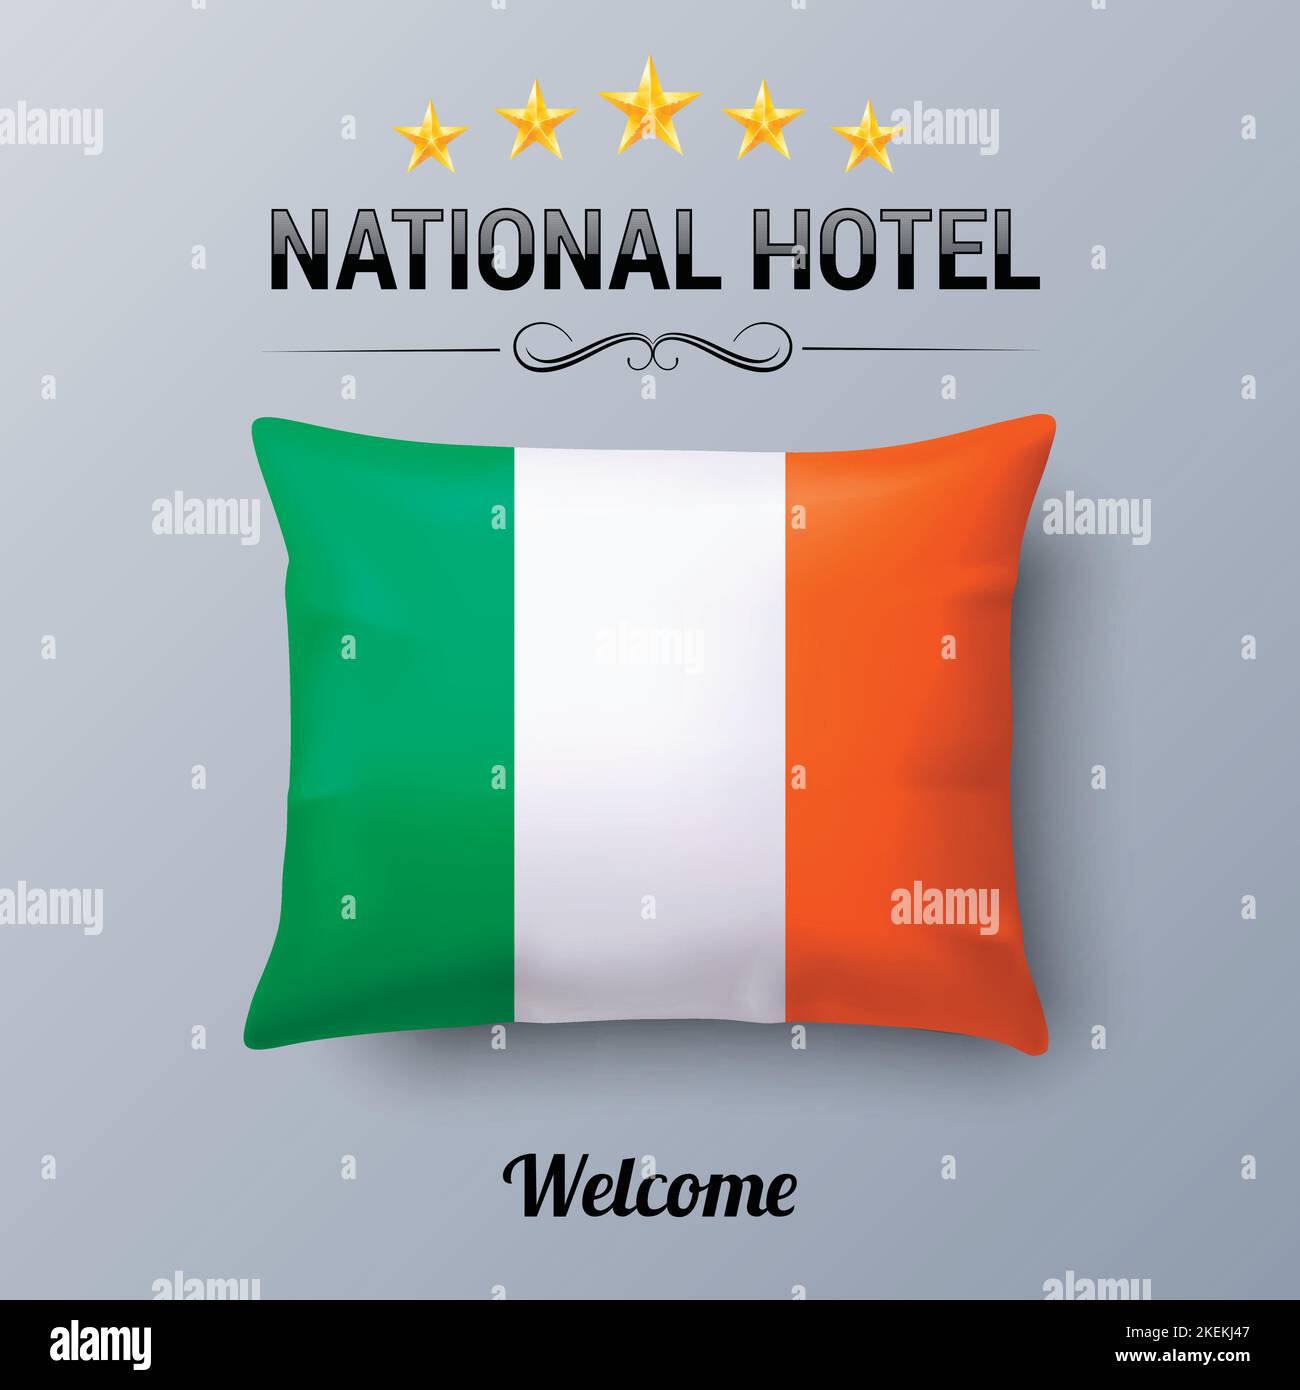 Realistic Pillow and Flag of Ireland as Symbol National Hotel. Flag Pillow Cover with Irish flag Stock Vector